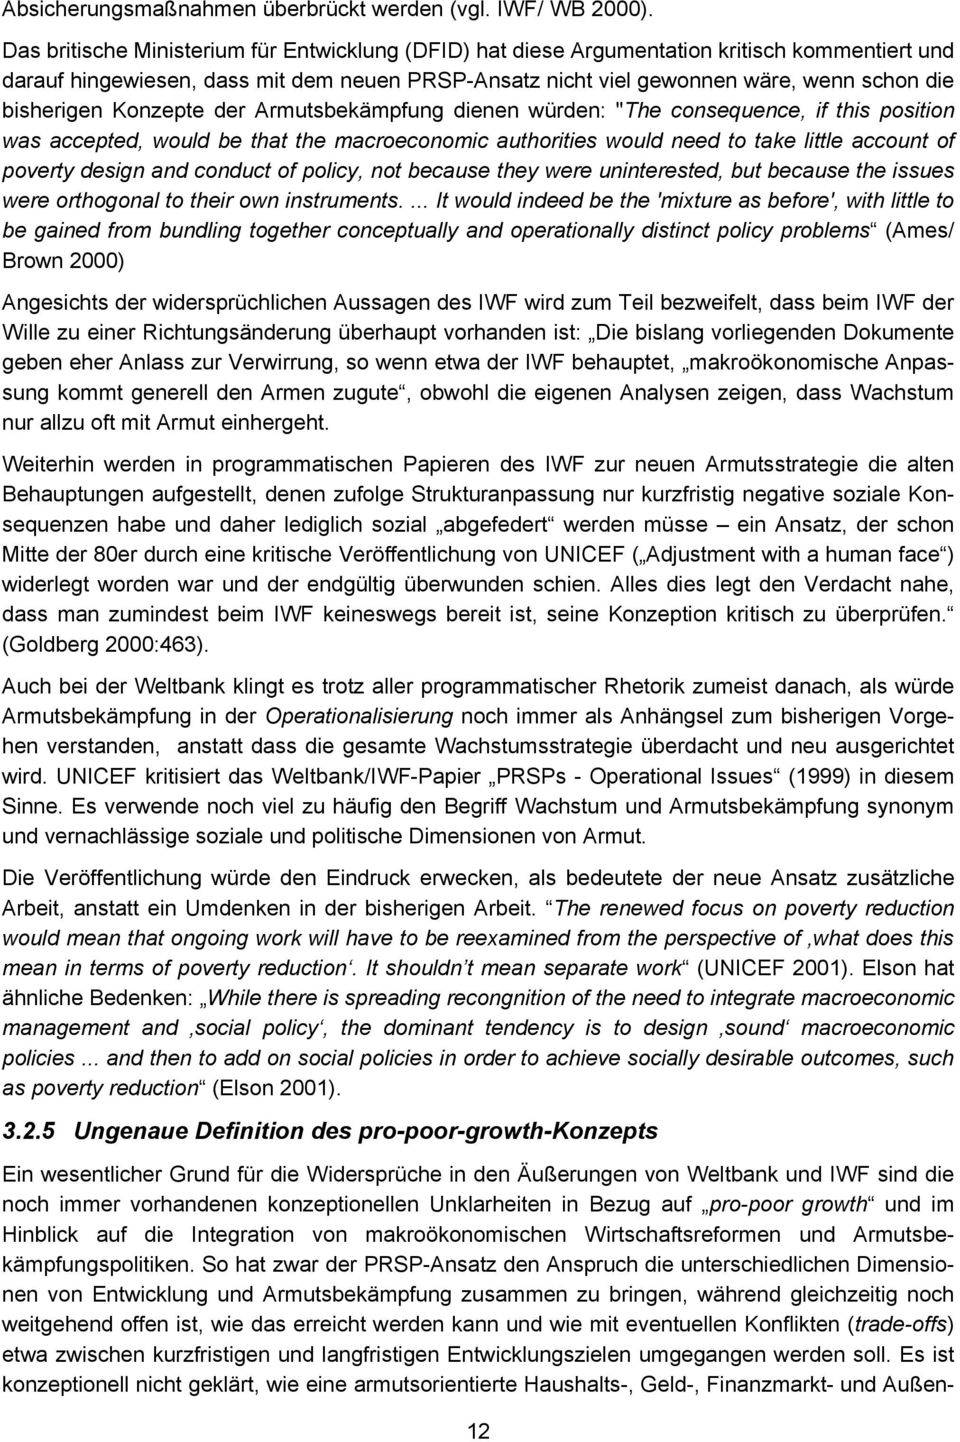 bisherigen Konzepte der Armutsbekämpfung dienen würden: "The consequence, if this position was accepted, would be that the macroeconomic authorities would need to take little account of poverty